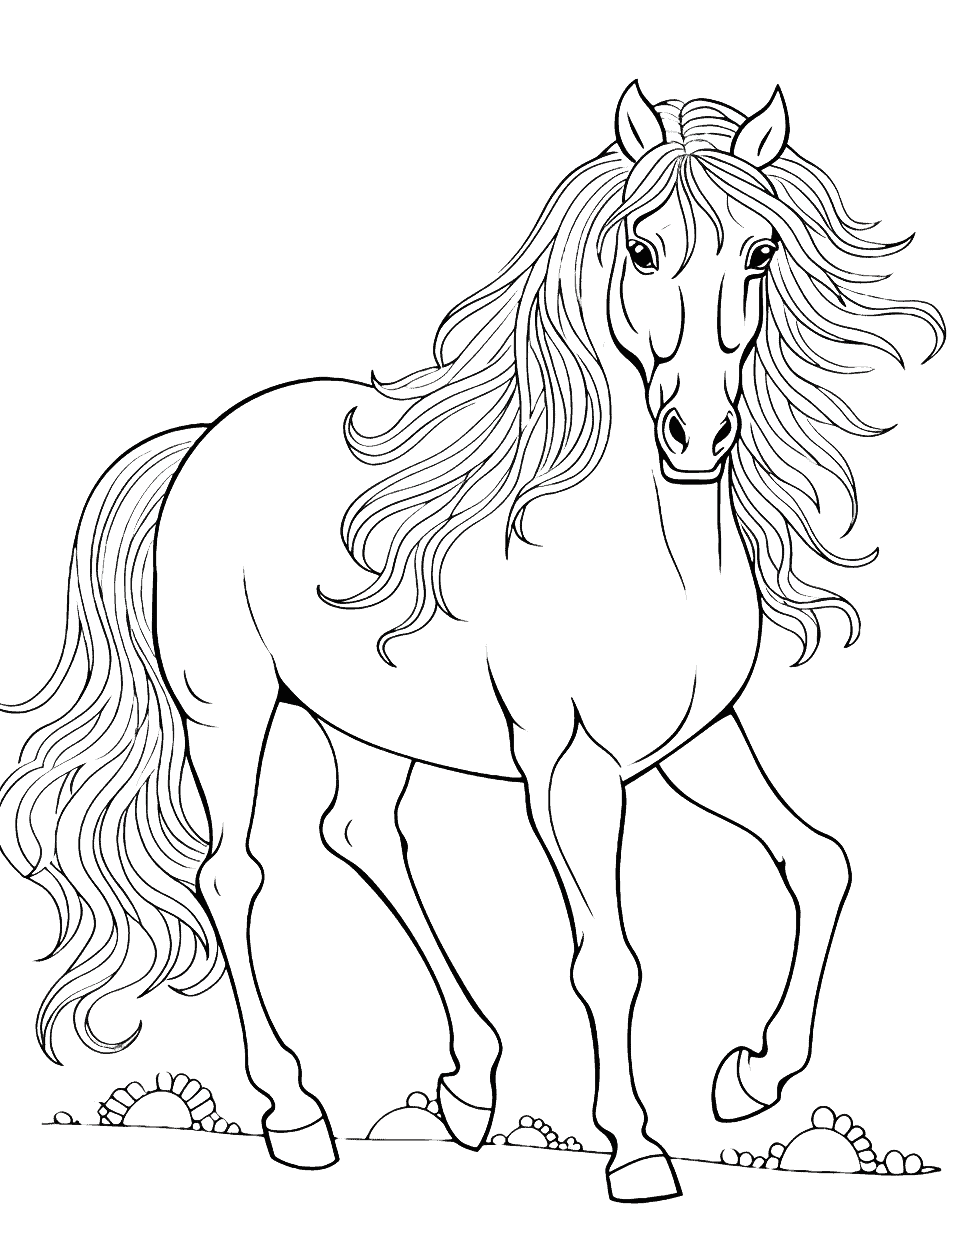 Majestic Friesian Horse Coloring Page - A Friesian horse with its impressive size and long, flowing mane and tail.